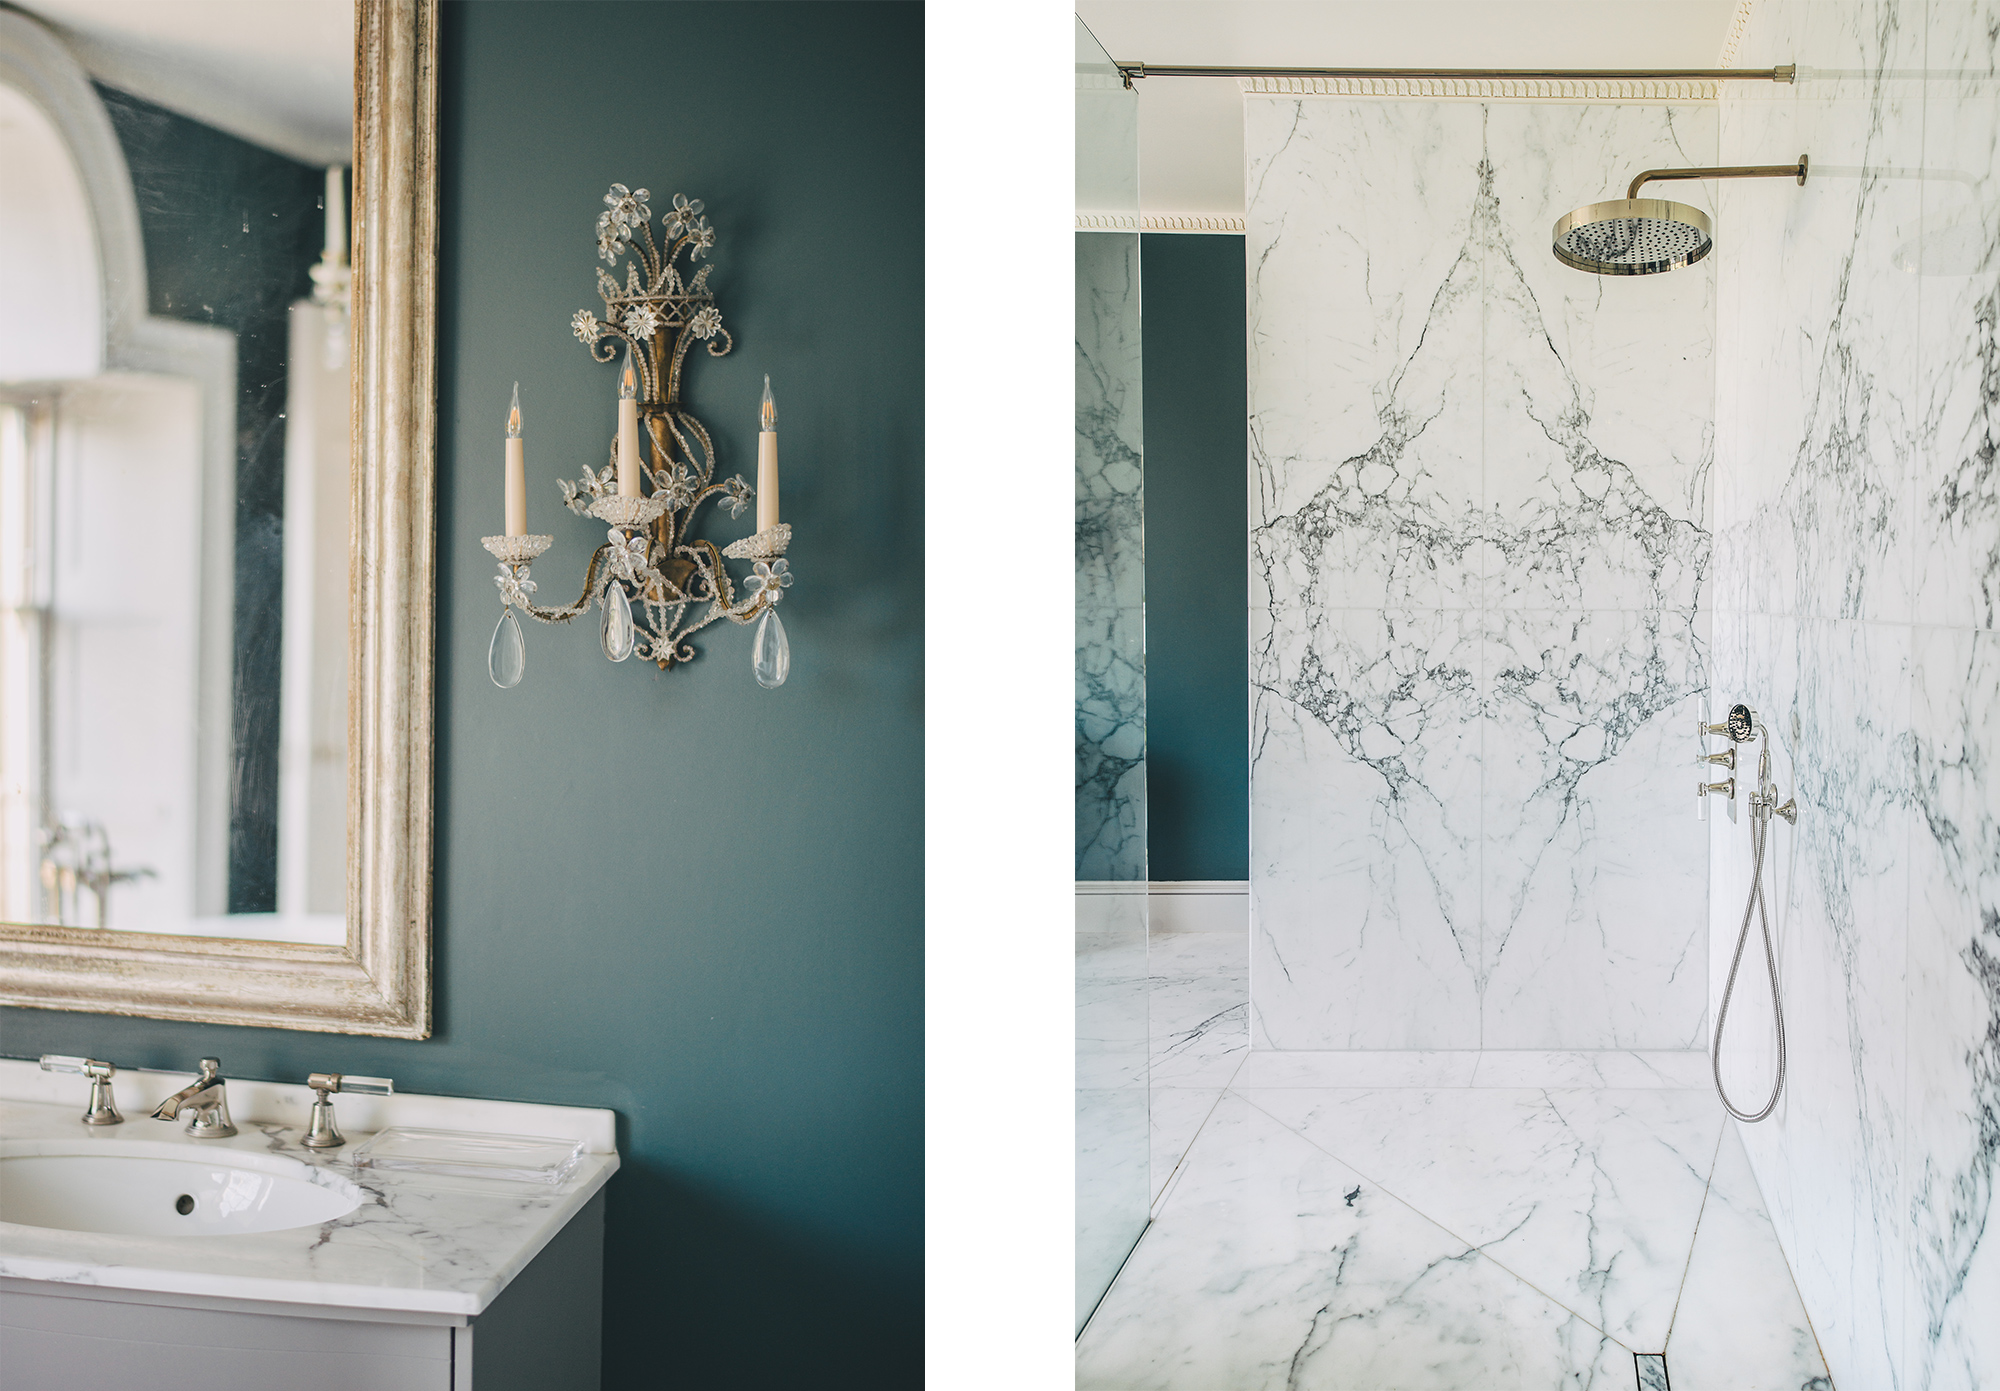 The white marble of the Templeton House/the decor.